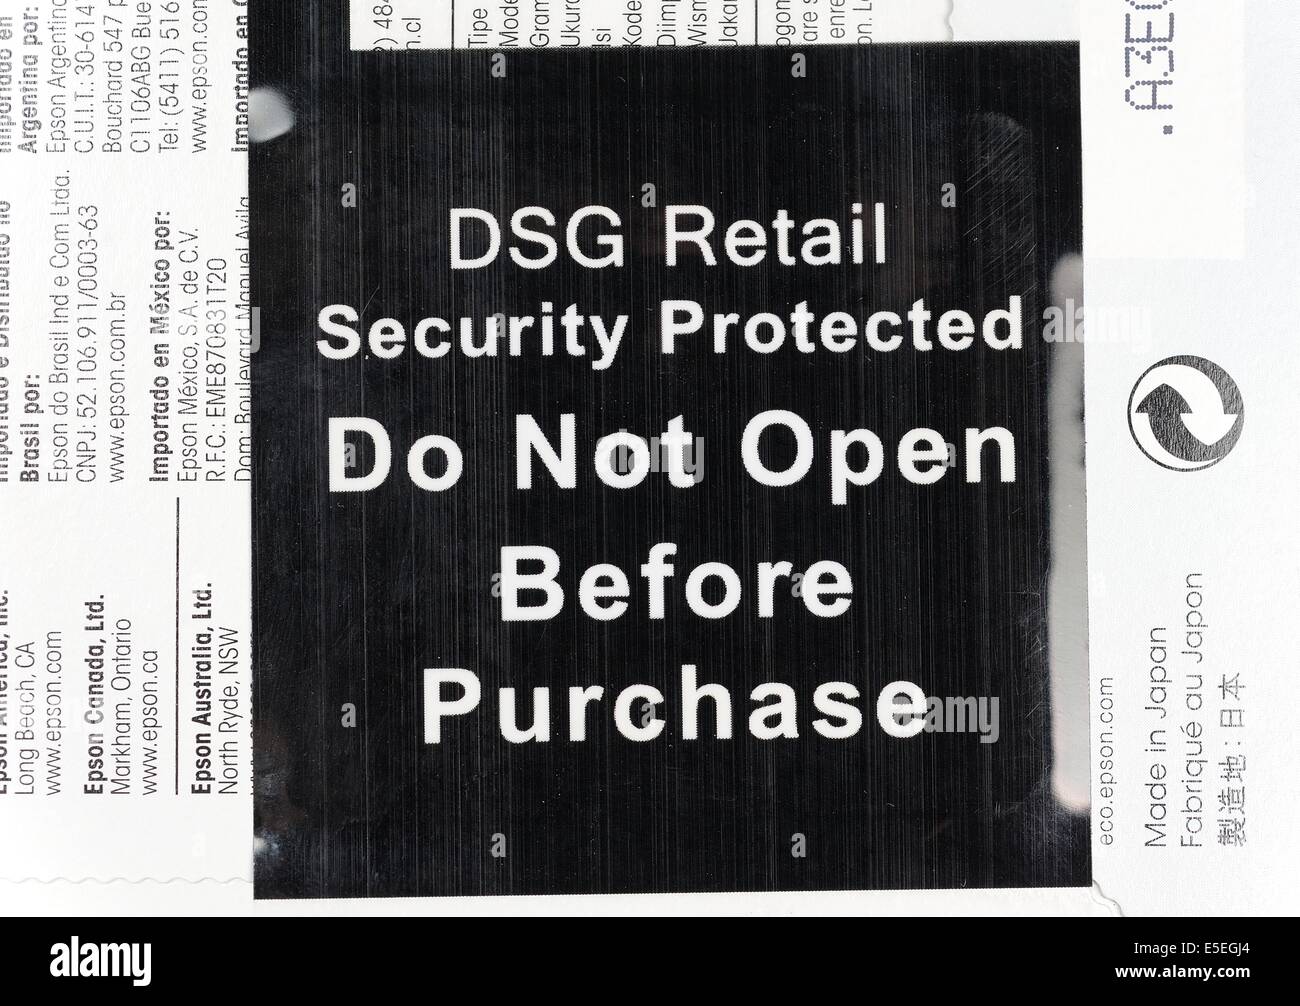 DSG retail do not open before purchase security tag Stock Photo